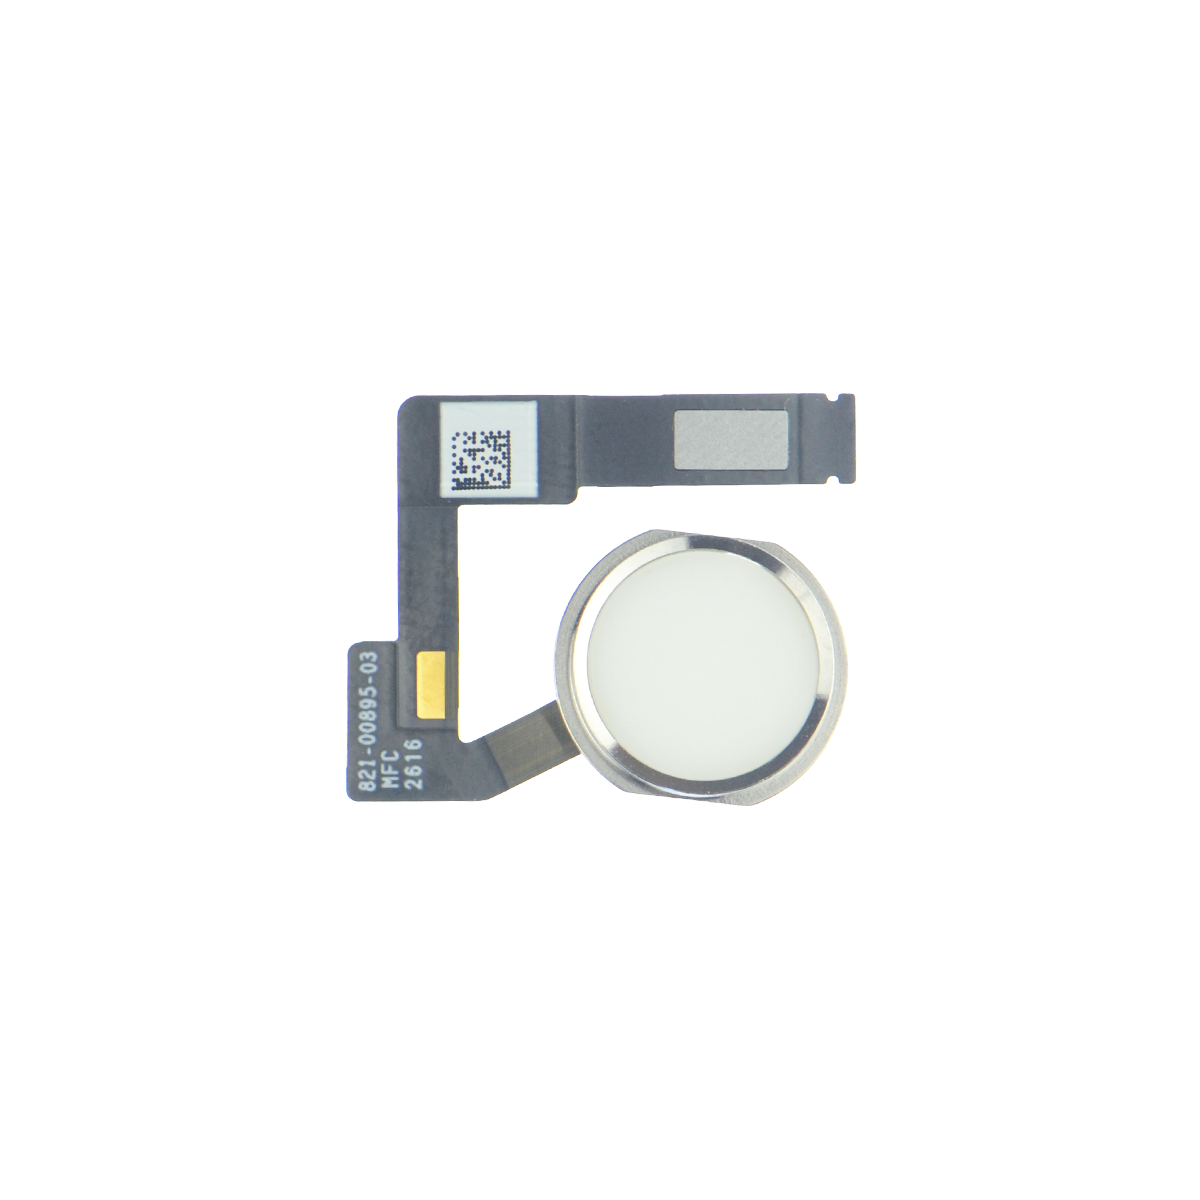 ipad-pro-10-5-home-button-touch-id-assembly-white-silver_S4VPEHBAK8CN.png